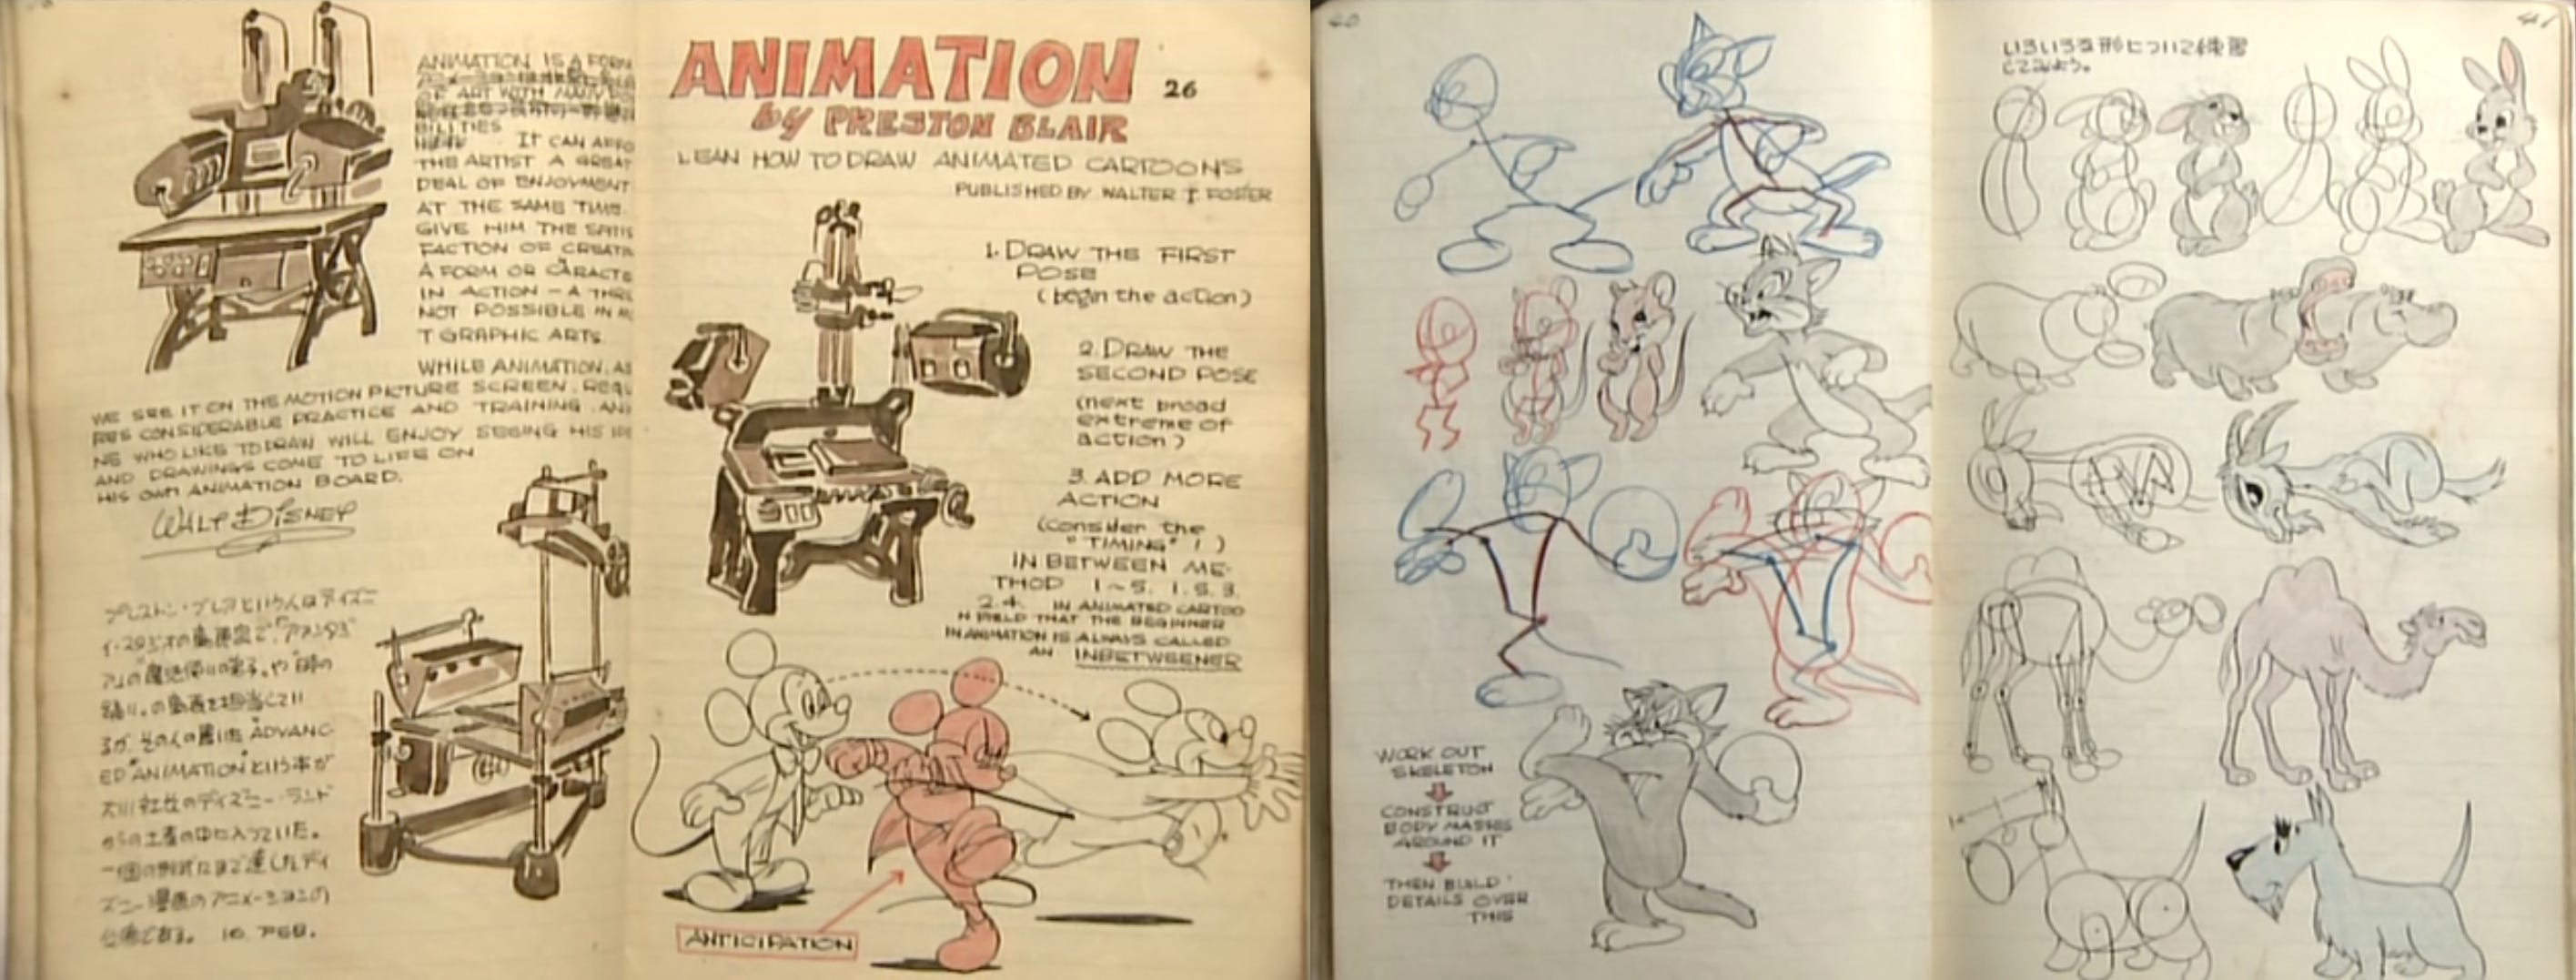 The Most Important Animation Book Ever Written